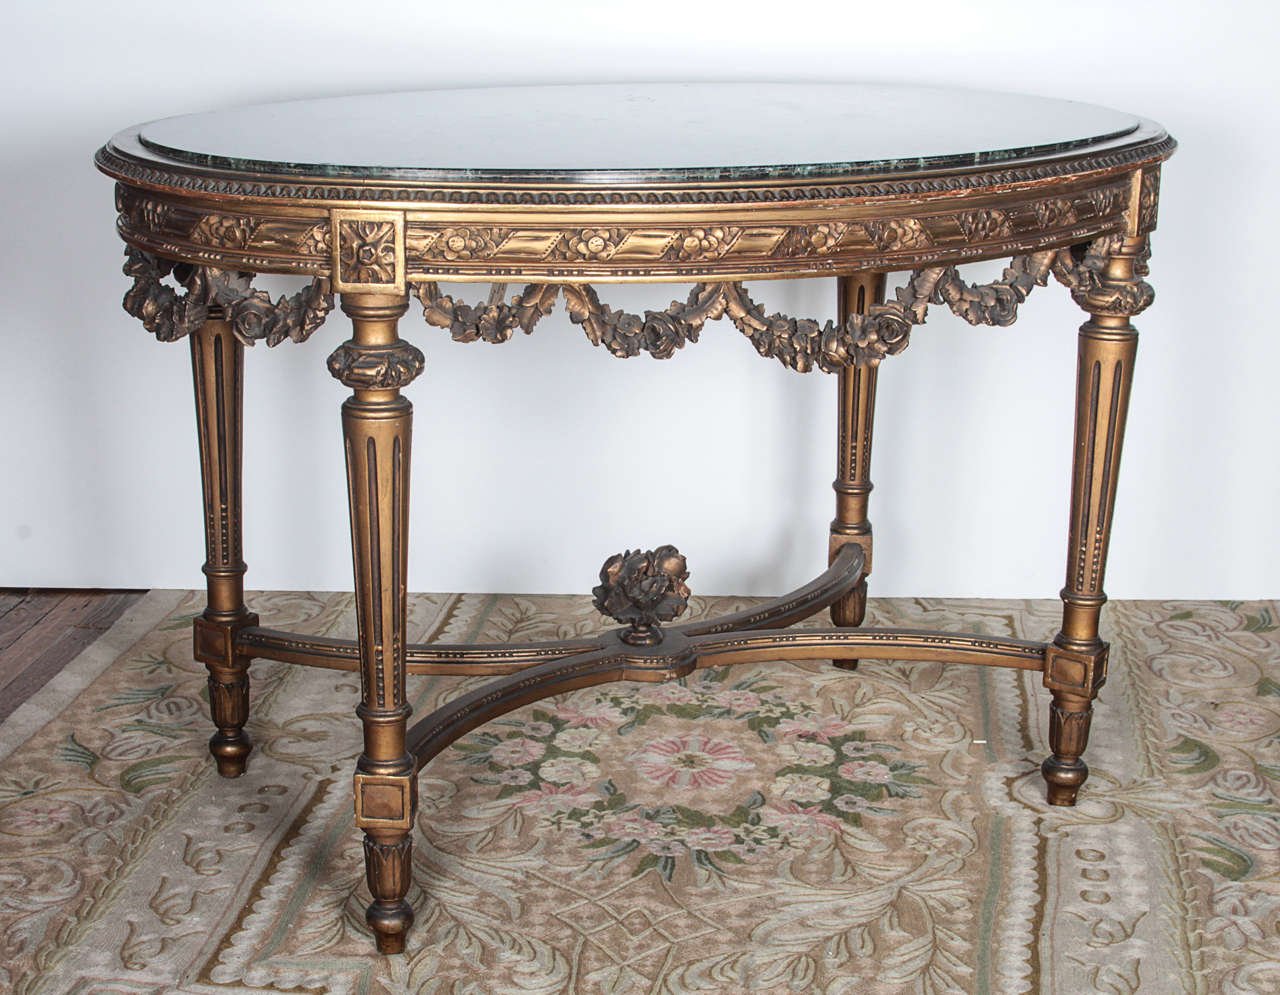 Highly ornate, hand-carved gilded oval wooden table with decorative swags and fluted legs in Louis XVI style. Green marble top in excellent condition with no breaks or damages. This item can be seen at our 149 Madison Ave. location in Manhattan.